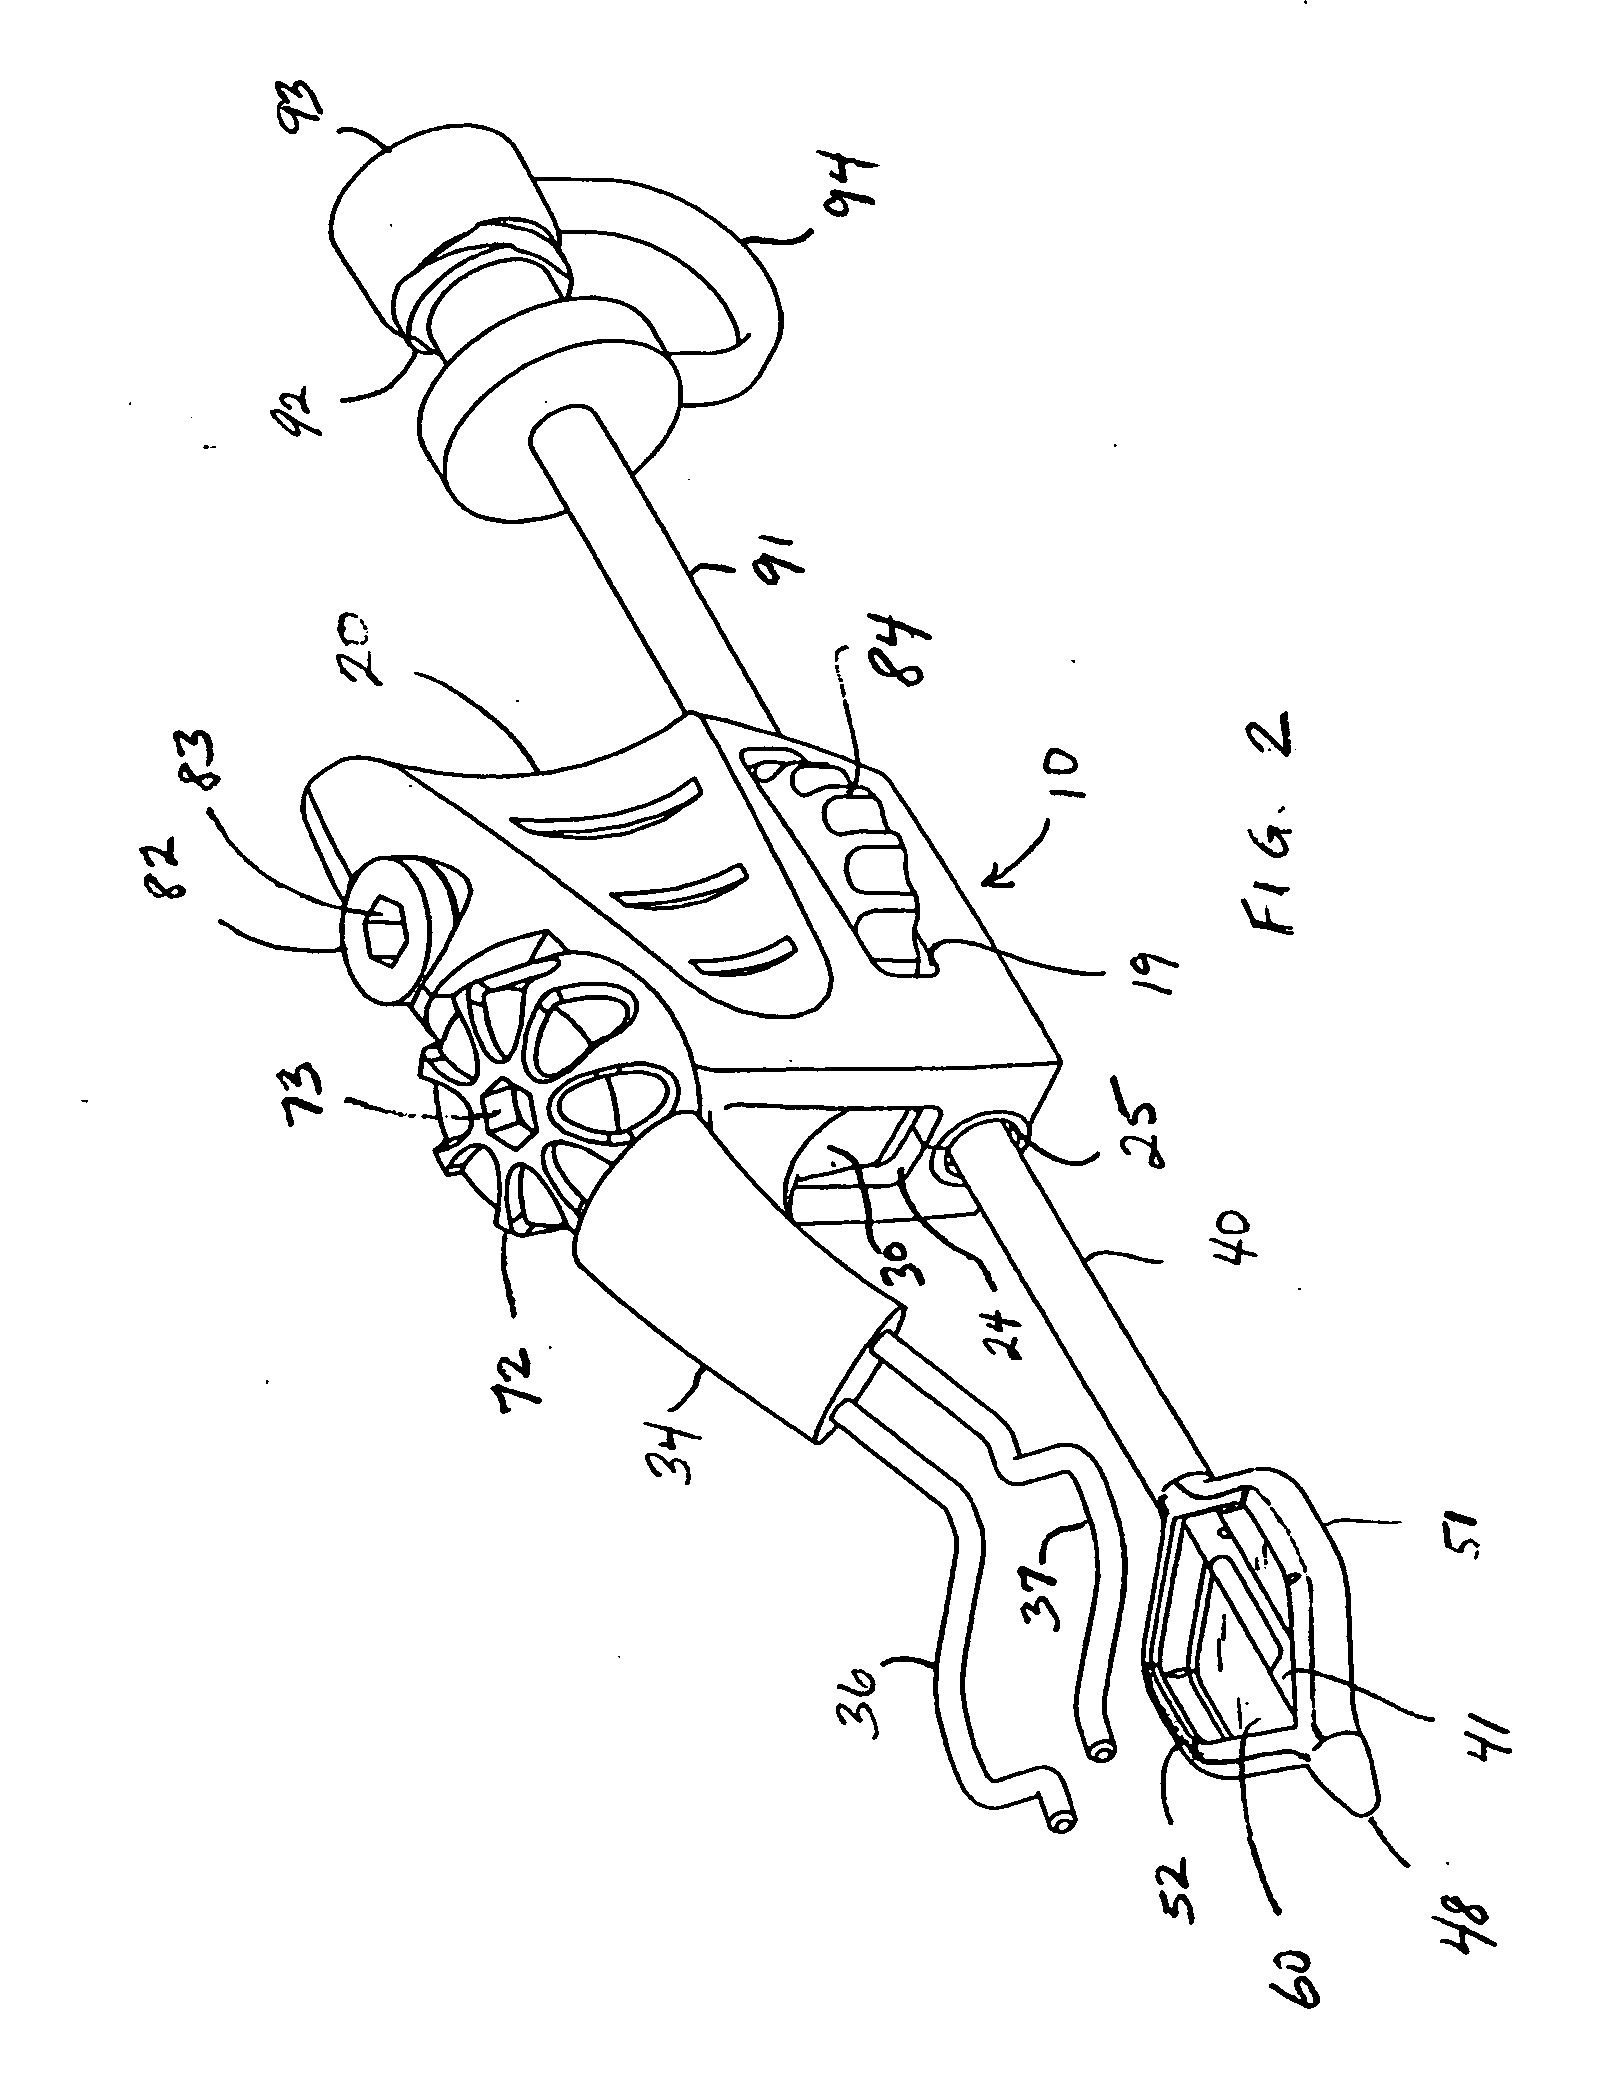 Device and method for performing multiple anastomoses